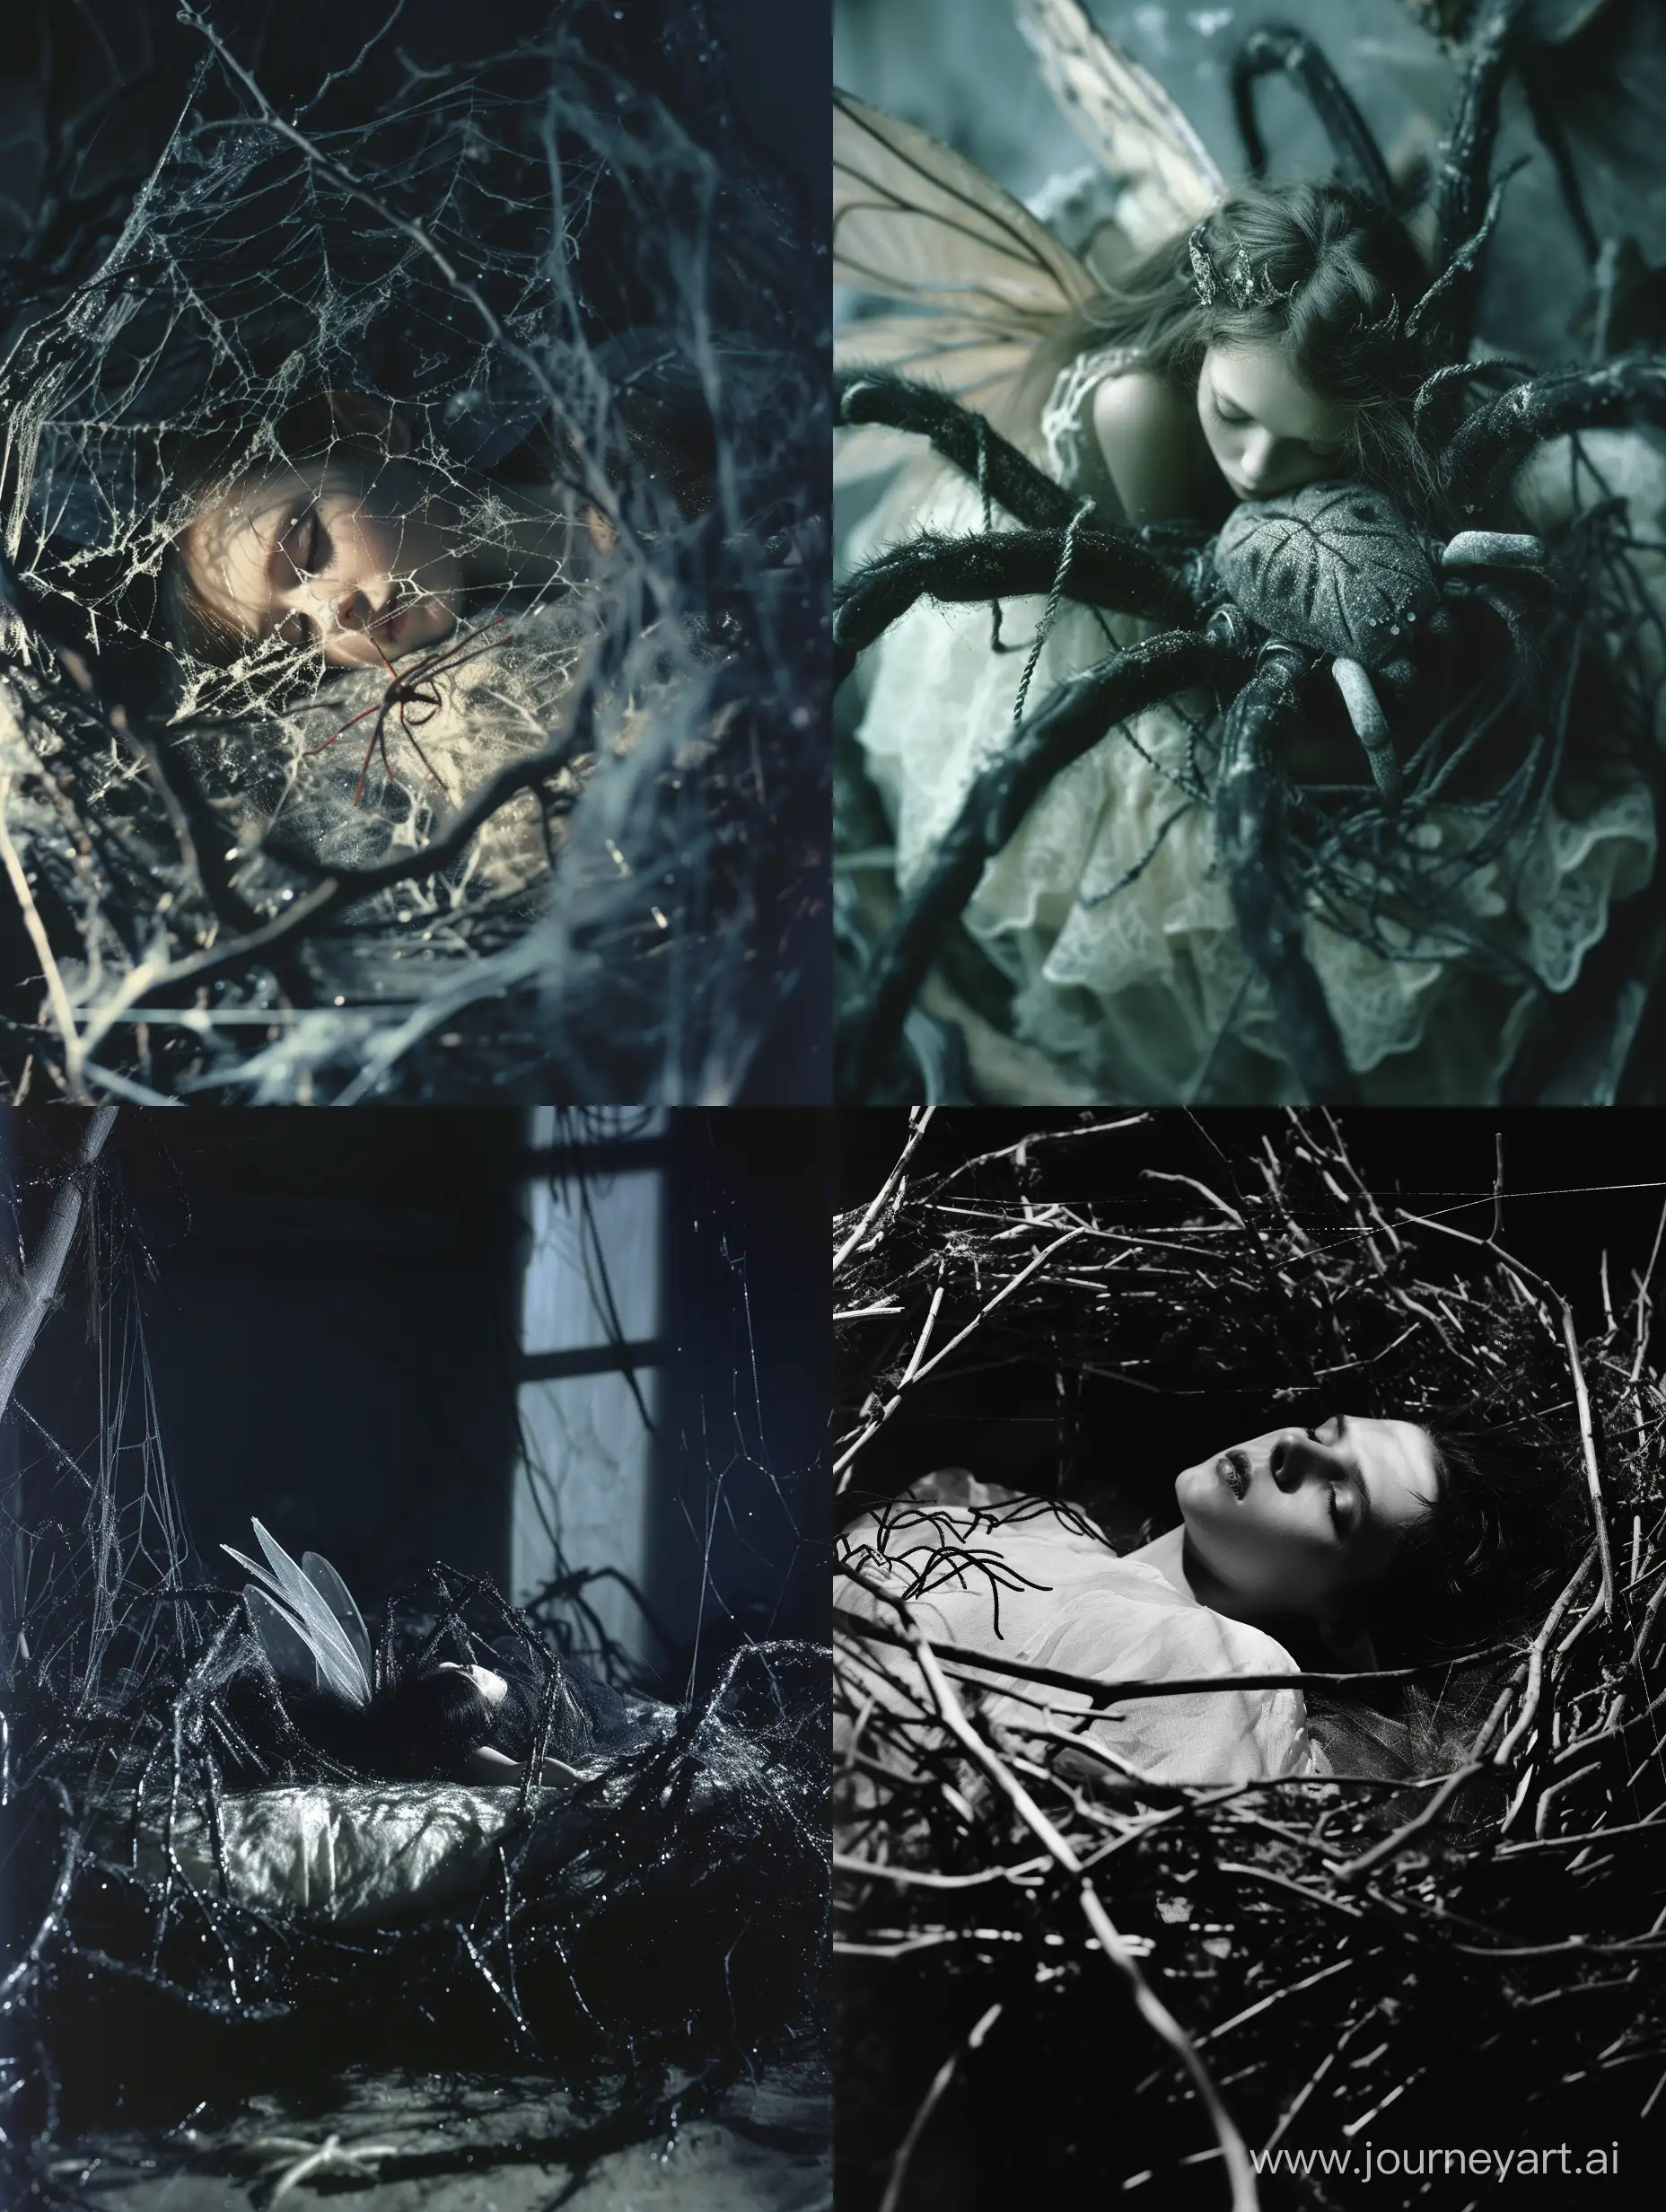 Saturated image of a fairy tangled in a spider bed, horror core, dark aesthetic, taken on provia